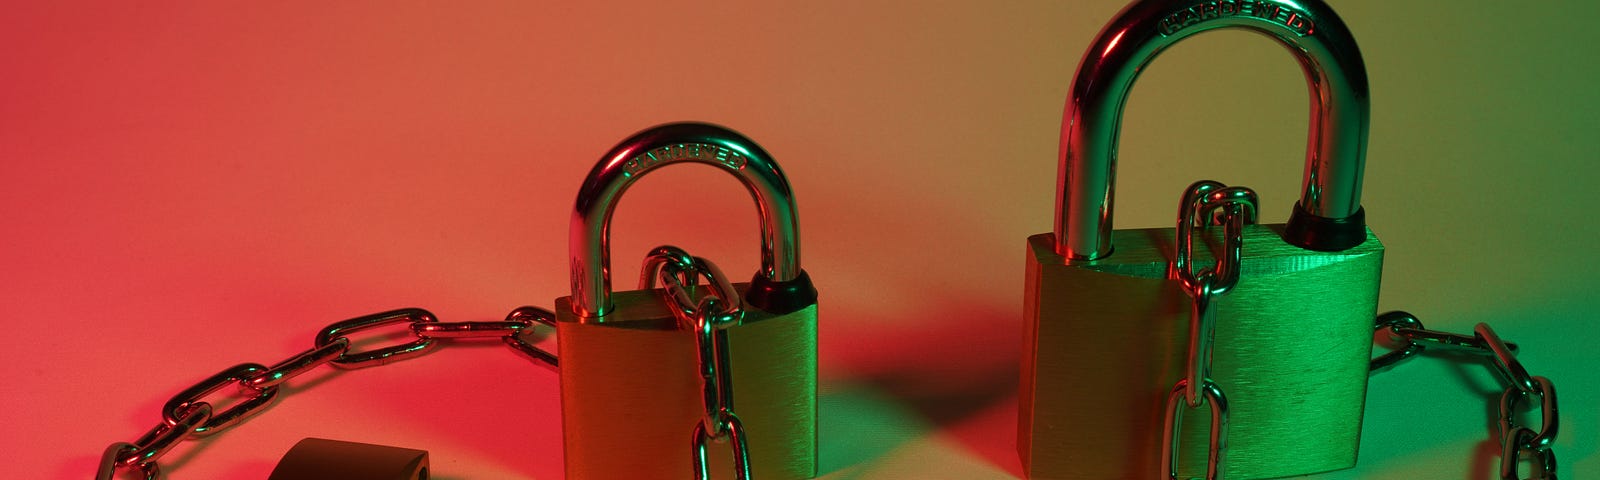 Two locked padlocks connected by a metal chain and a third unlocked padlock.